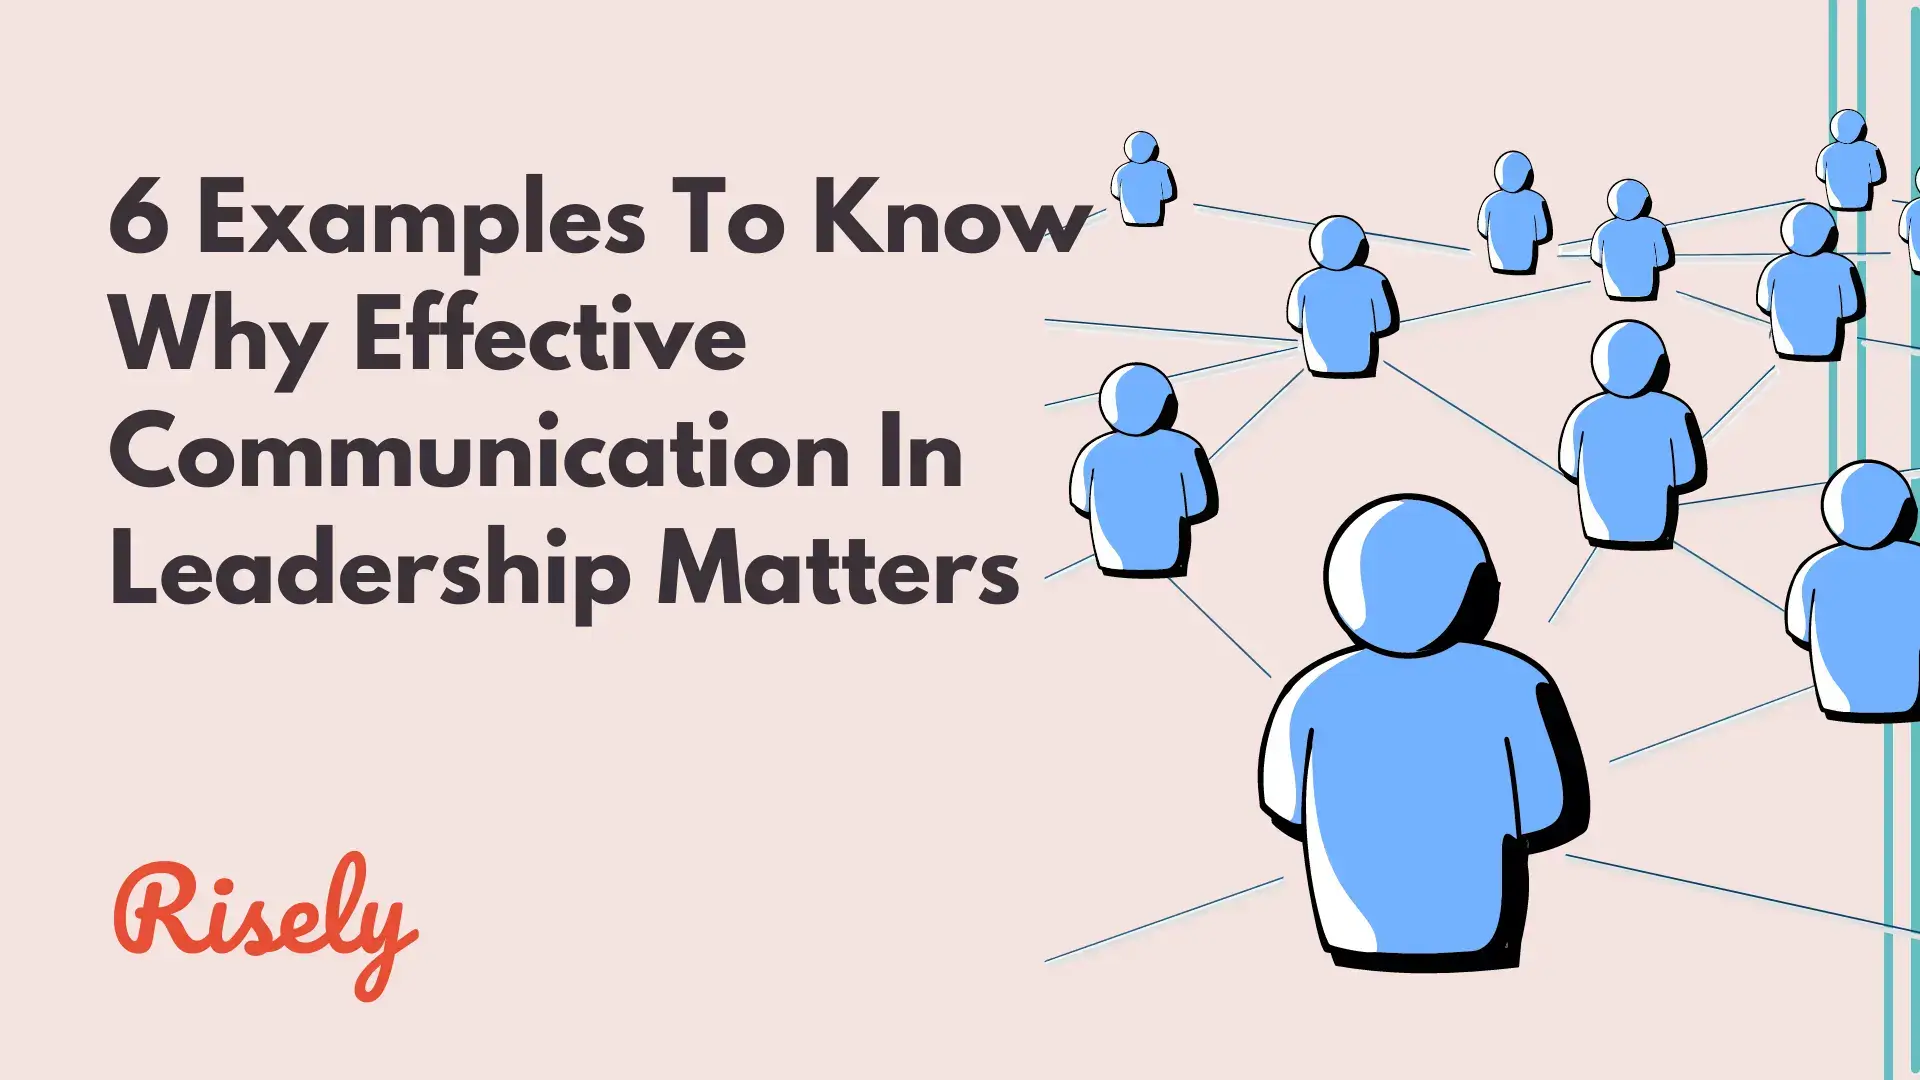 6 Examples To Know Why Effective Communication In Leadership Matters -  Risely